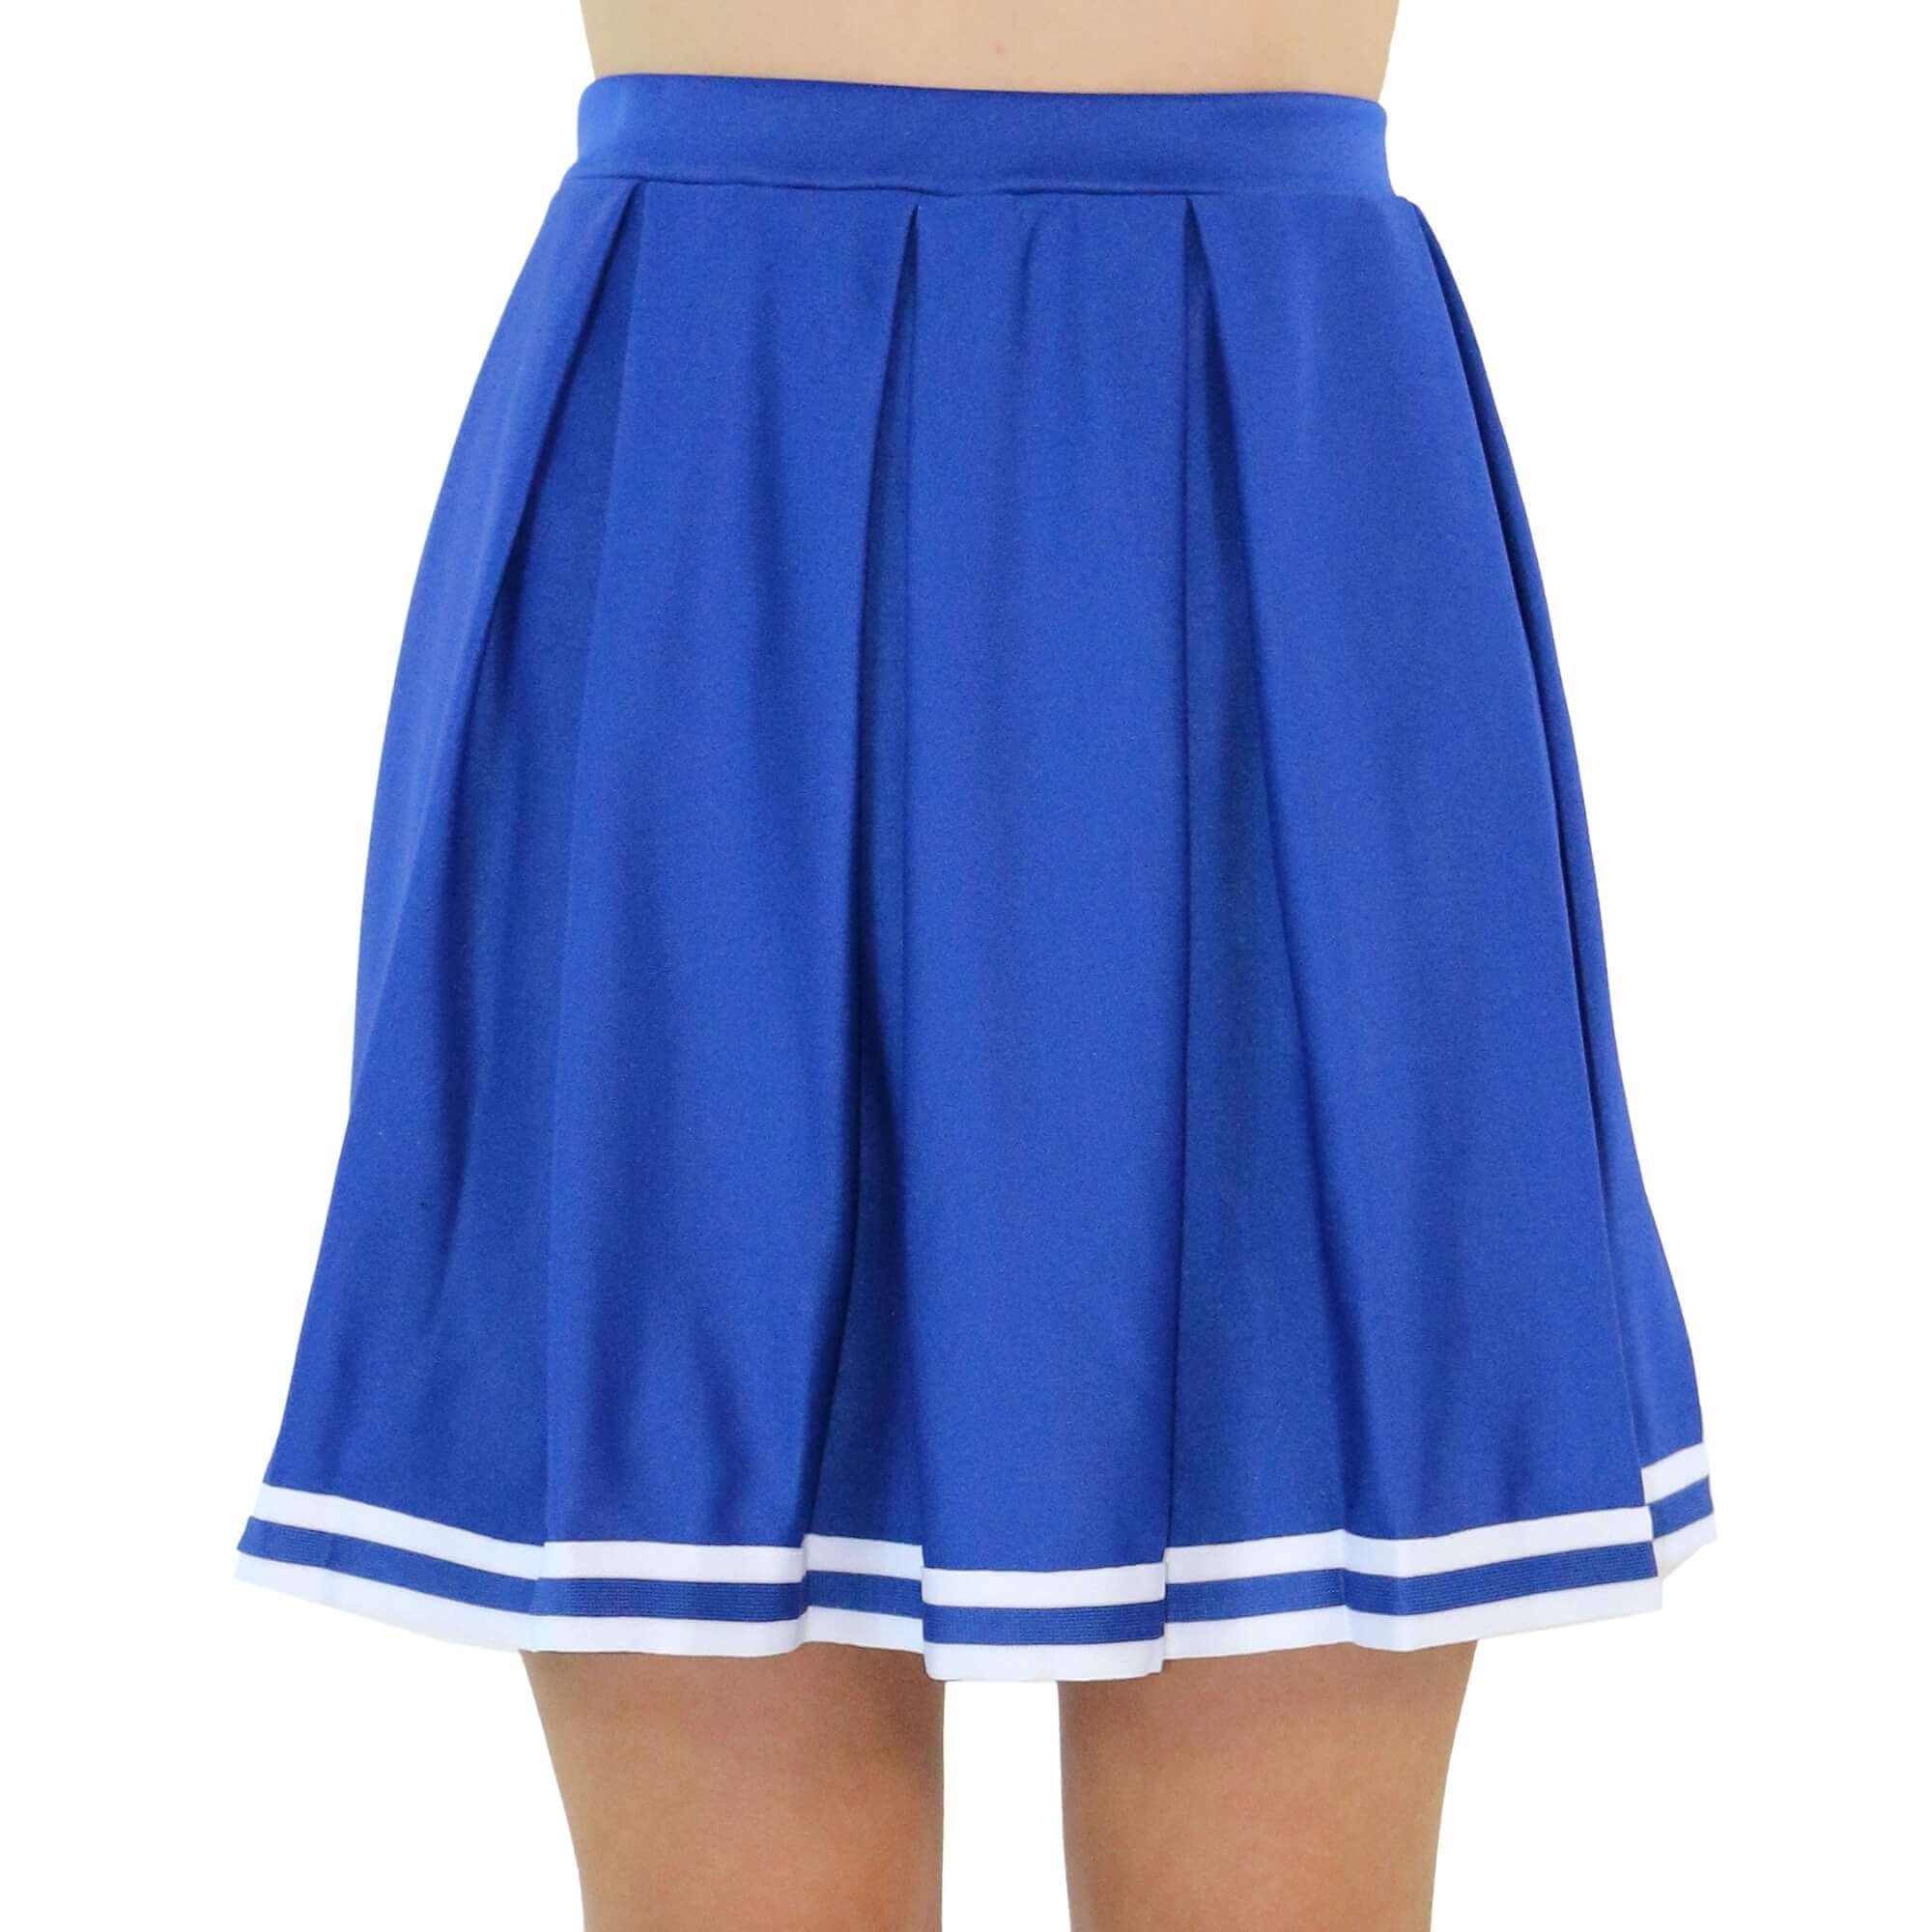 Danzcue Child Knit Pleat Cheerleading Skirt - Click Image to Close